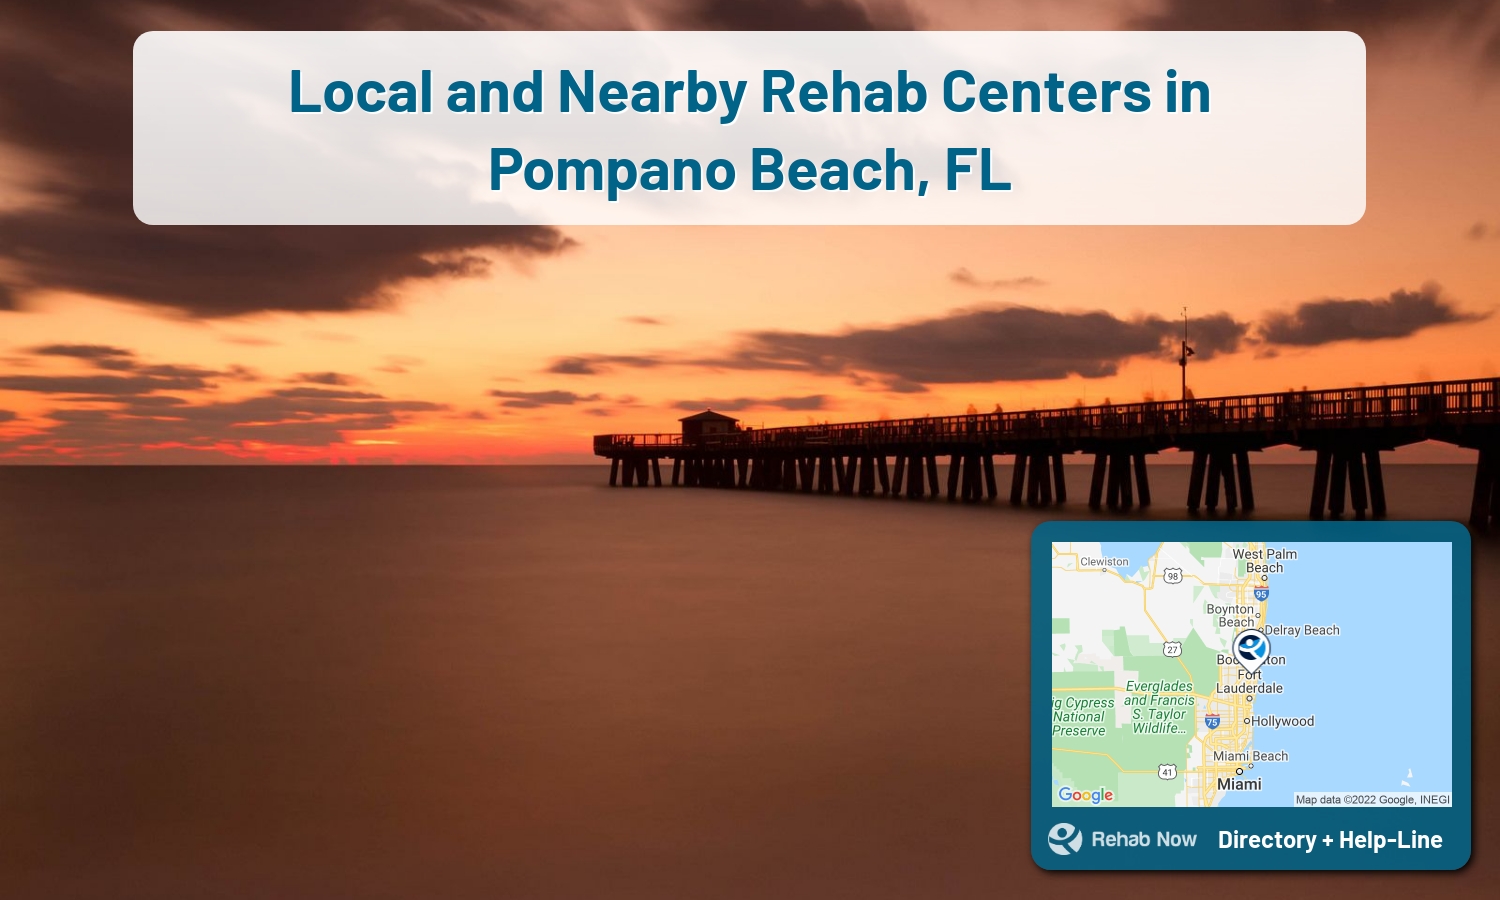 View options, availability, treatment methods, and more, for drug rehab and alcohol treatment in Pompano Beach, Florida